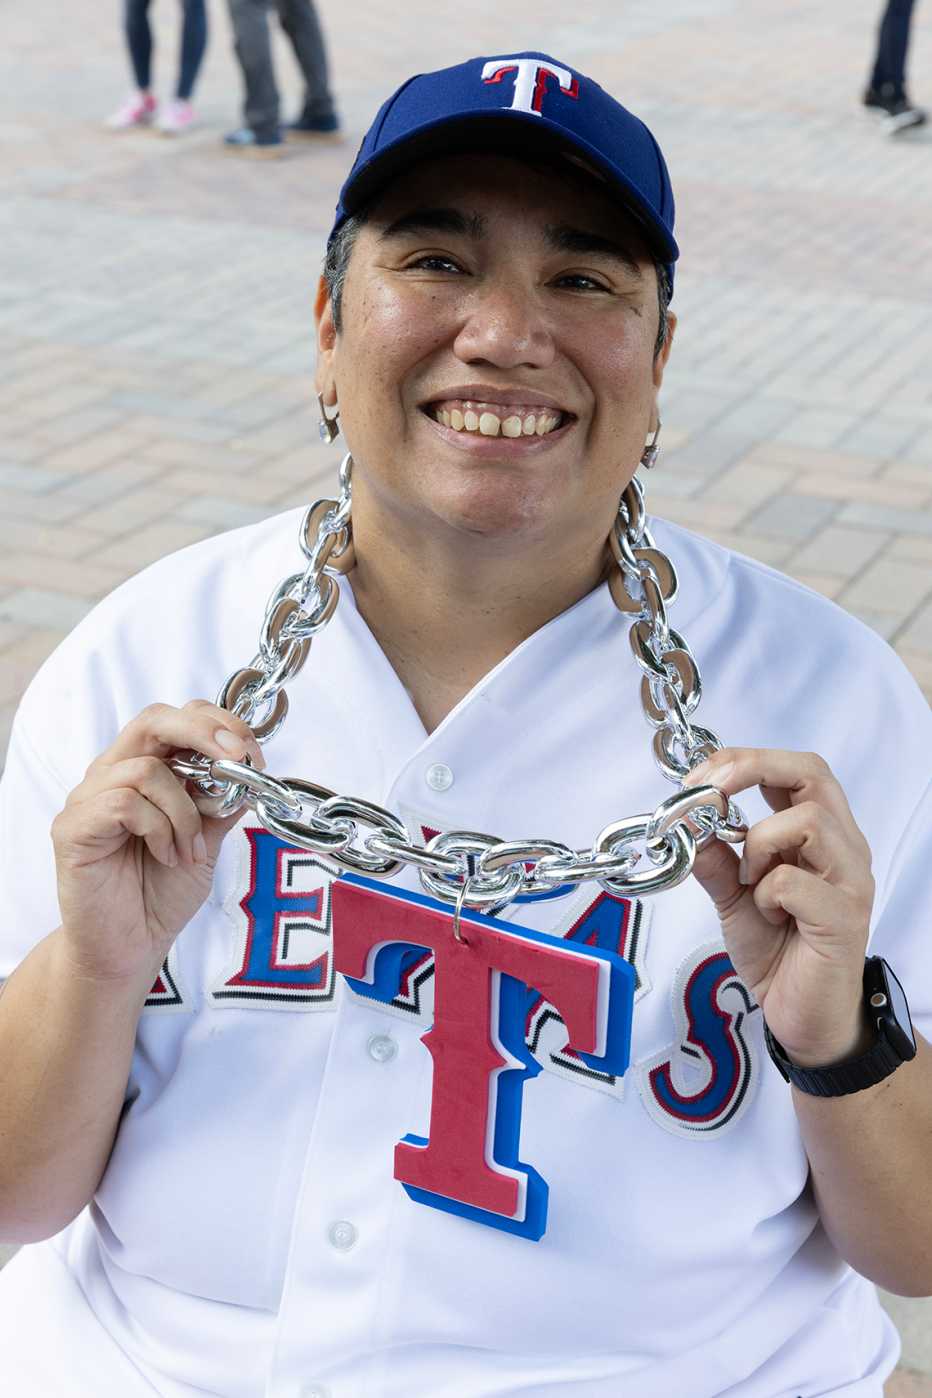 lisa jacklet wearing a chain with a large t on it